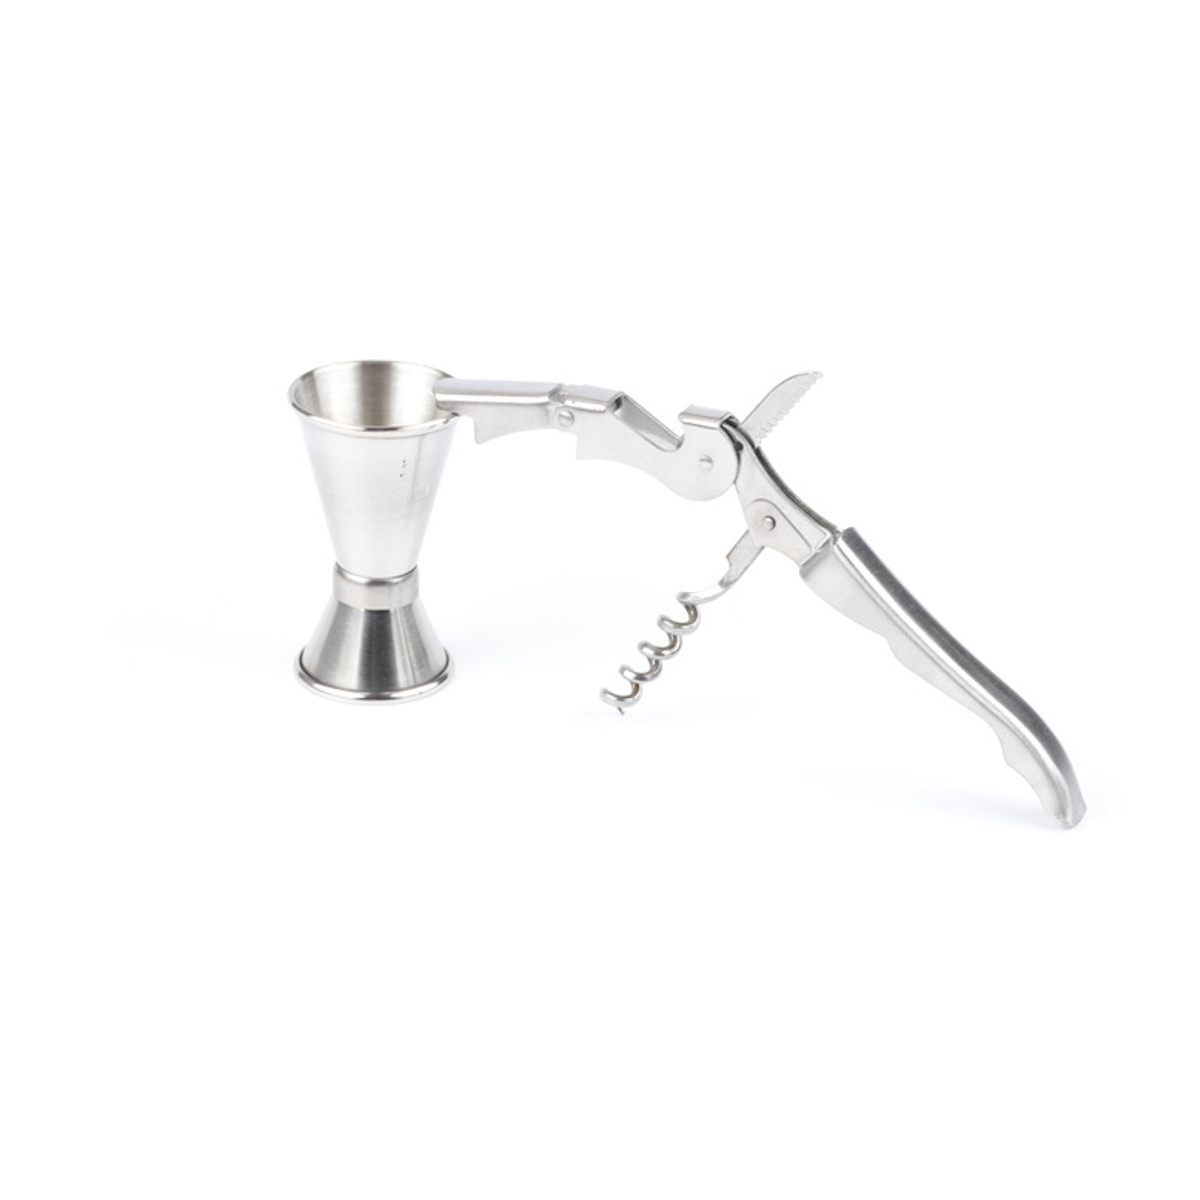 12pcs-Boston-Cocktail-Shaker-Bar-Stainless-Steel-Bartender-Mixer-with-Base-1750467-9